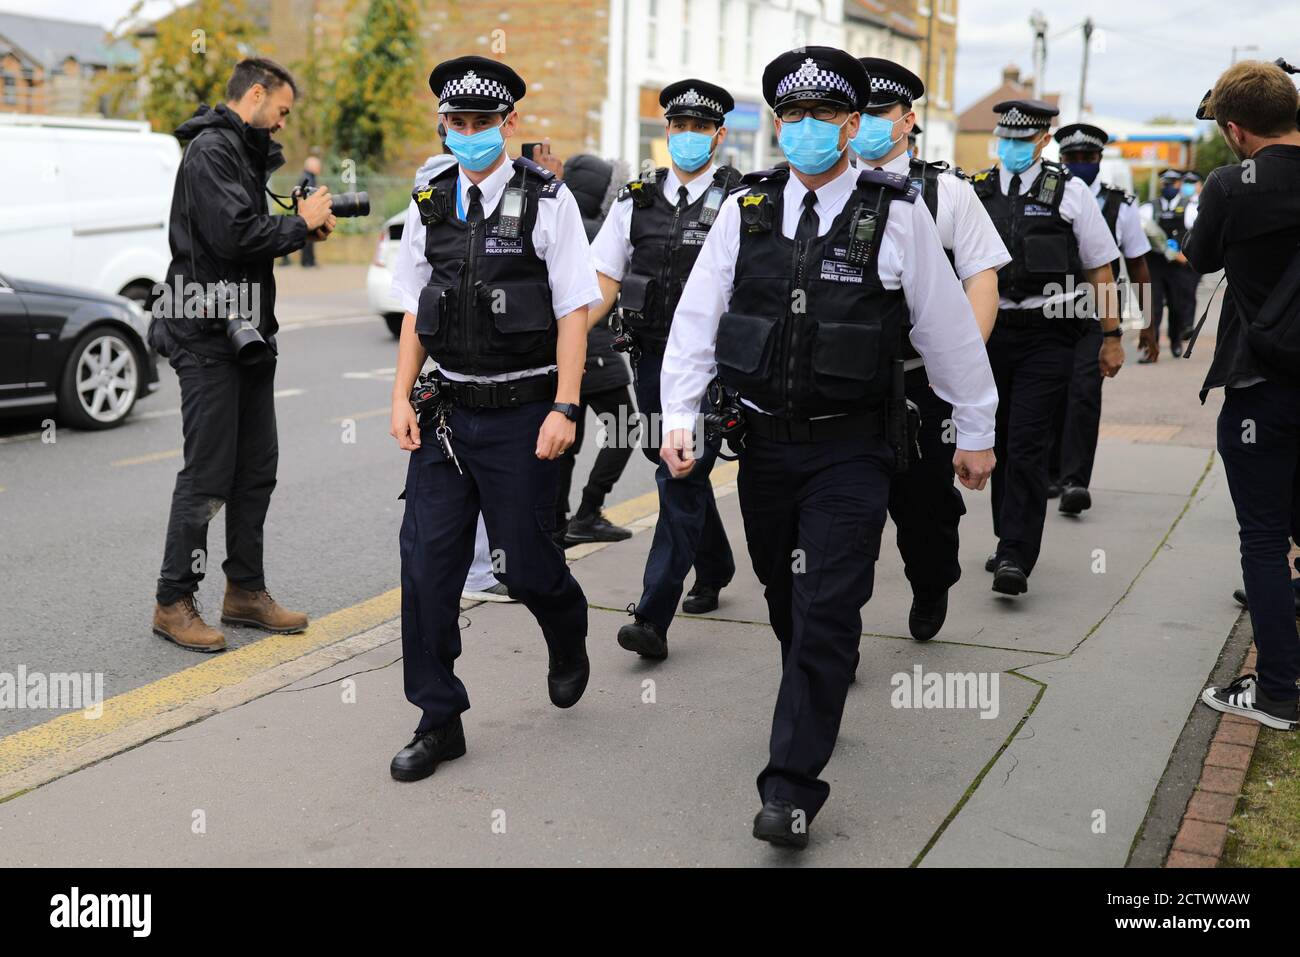 Police officers arrive to pay their respects at Croydon Custody Centre in south London where a police officer was shot by a man who was being detained in the early hours of Friday morning. The officer was treated at the scene before being taken to hospital where he subsequently died. Stock Photo